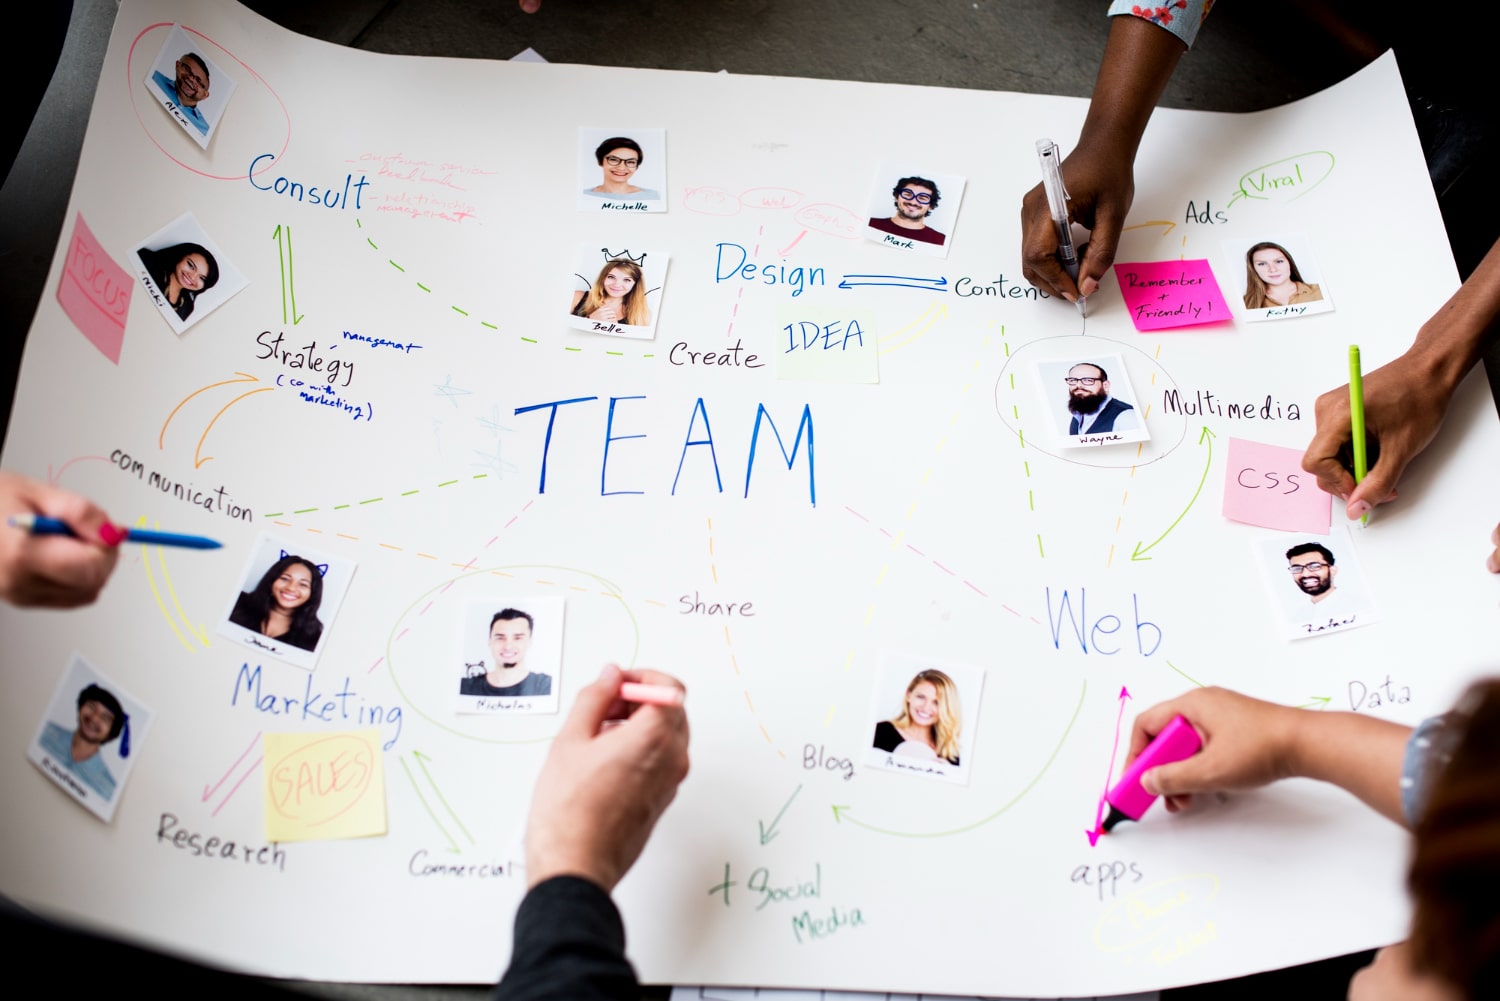 Communication, Collaboration, and Coordination: The 3 Cs for Cross-Functional Teams Success